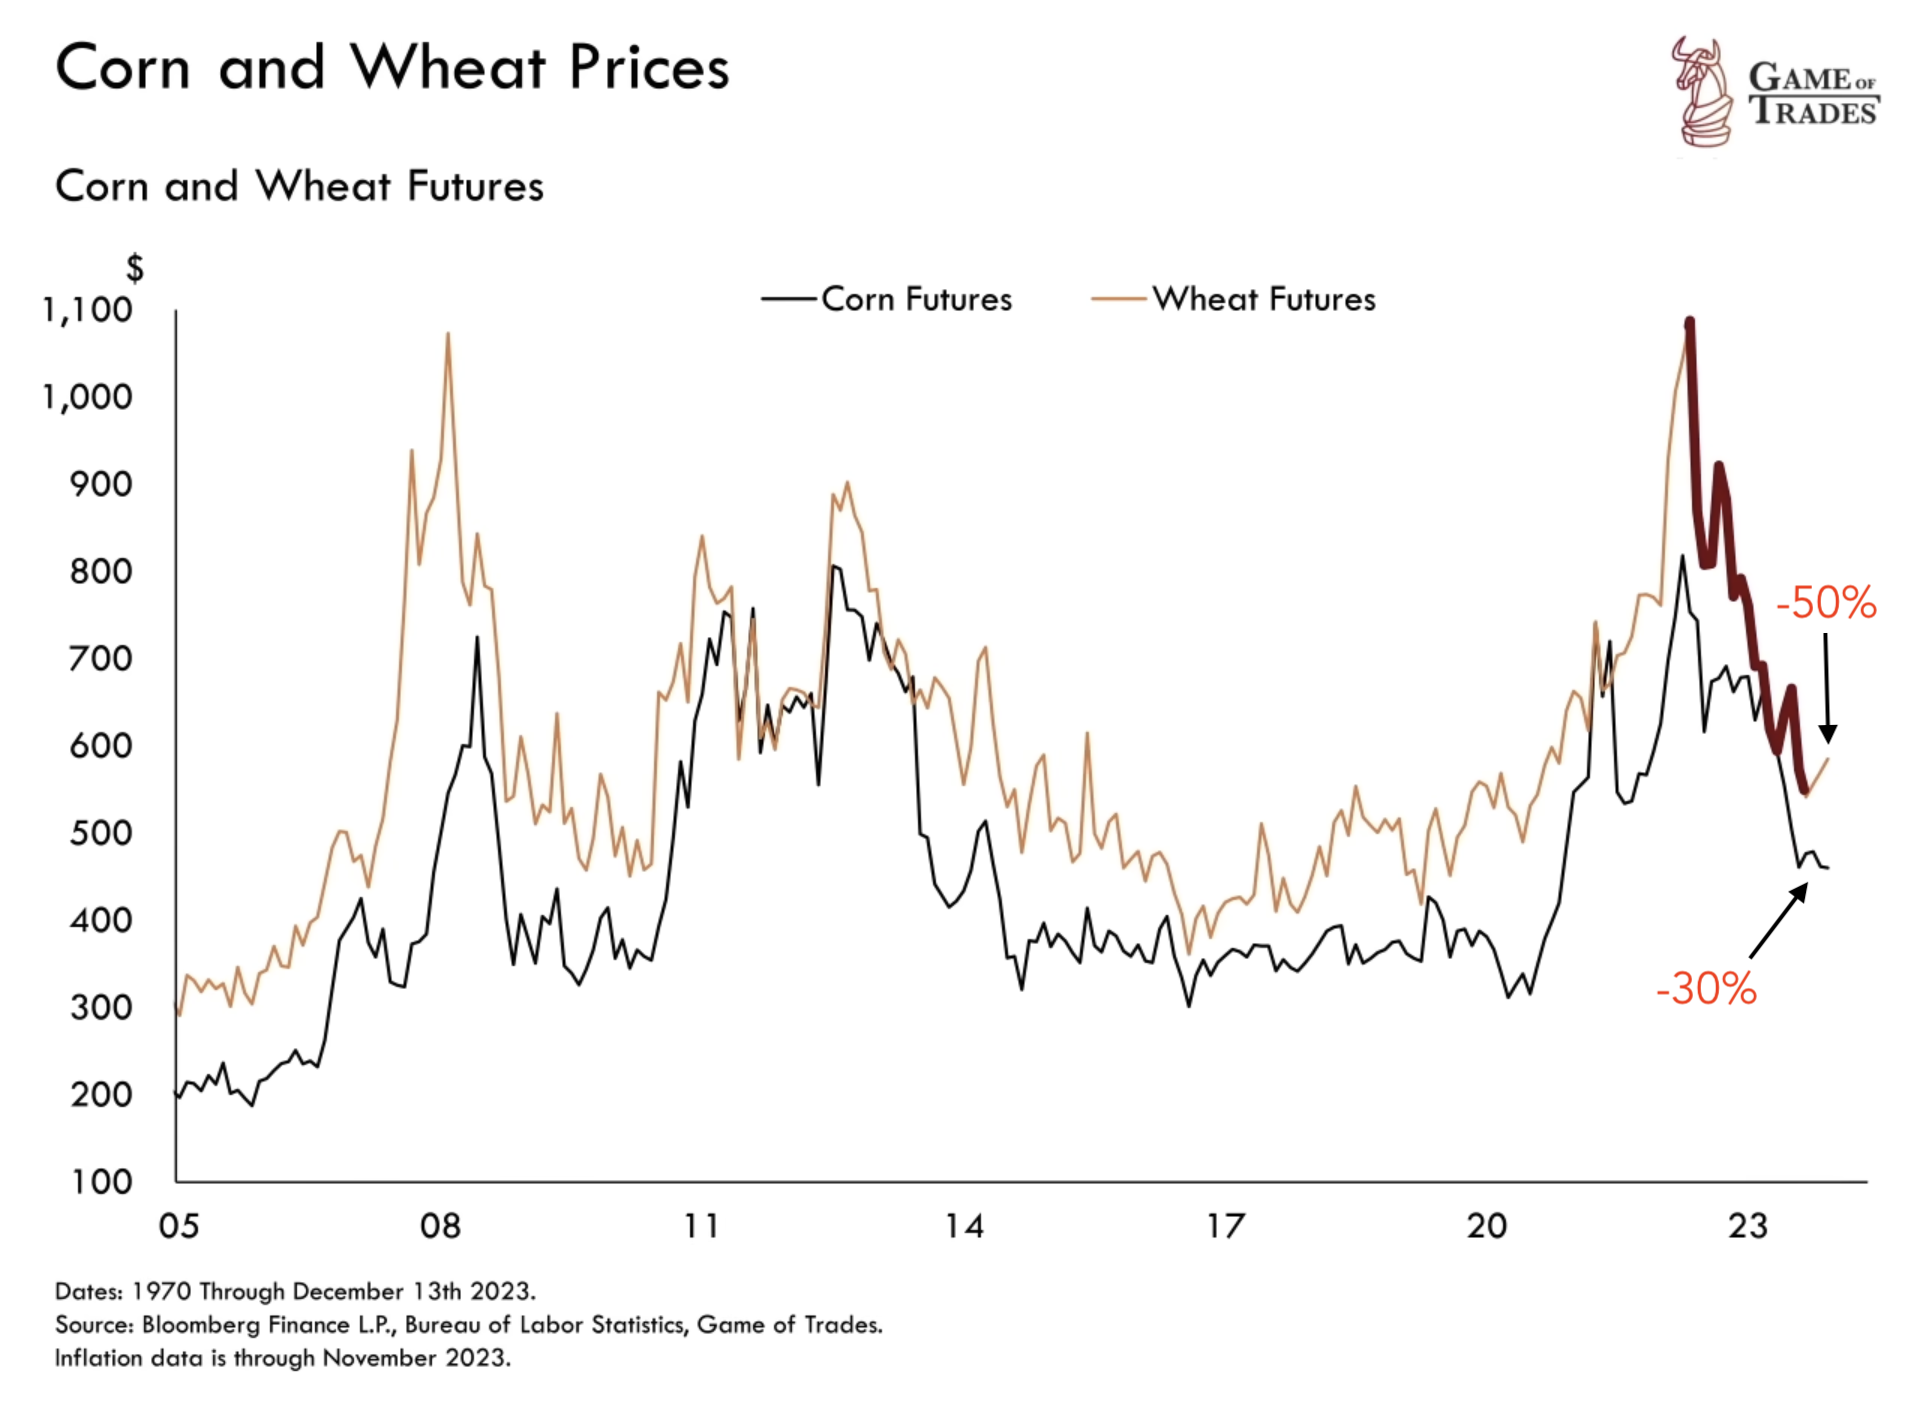 Corn and wheat prices deflation